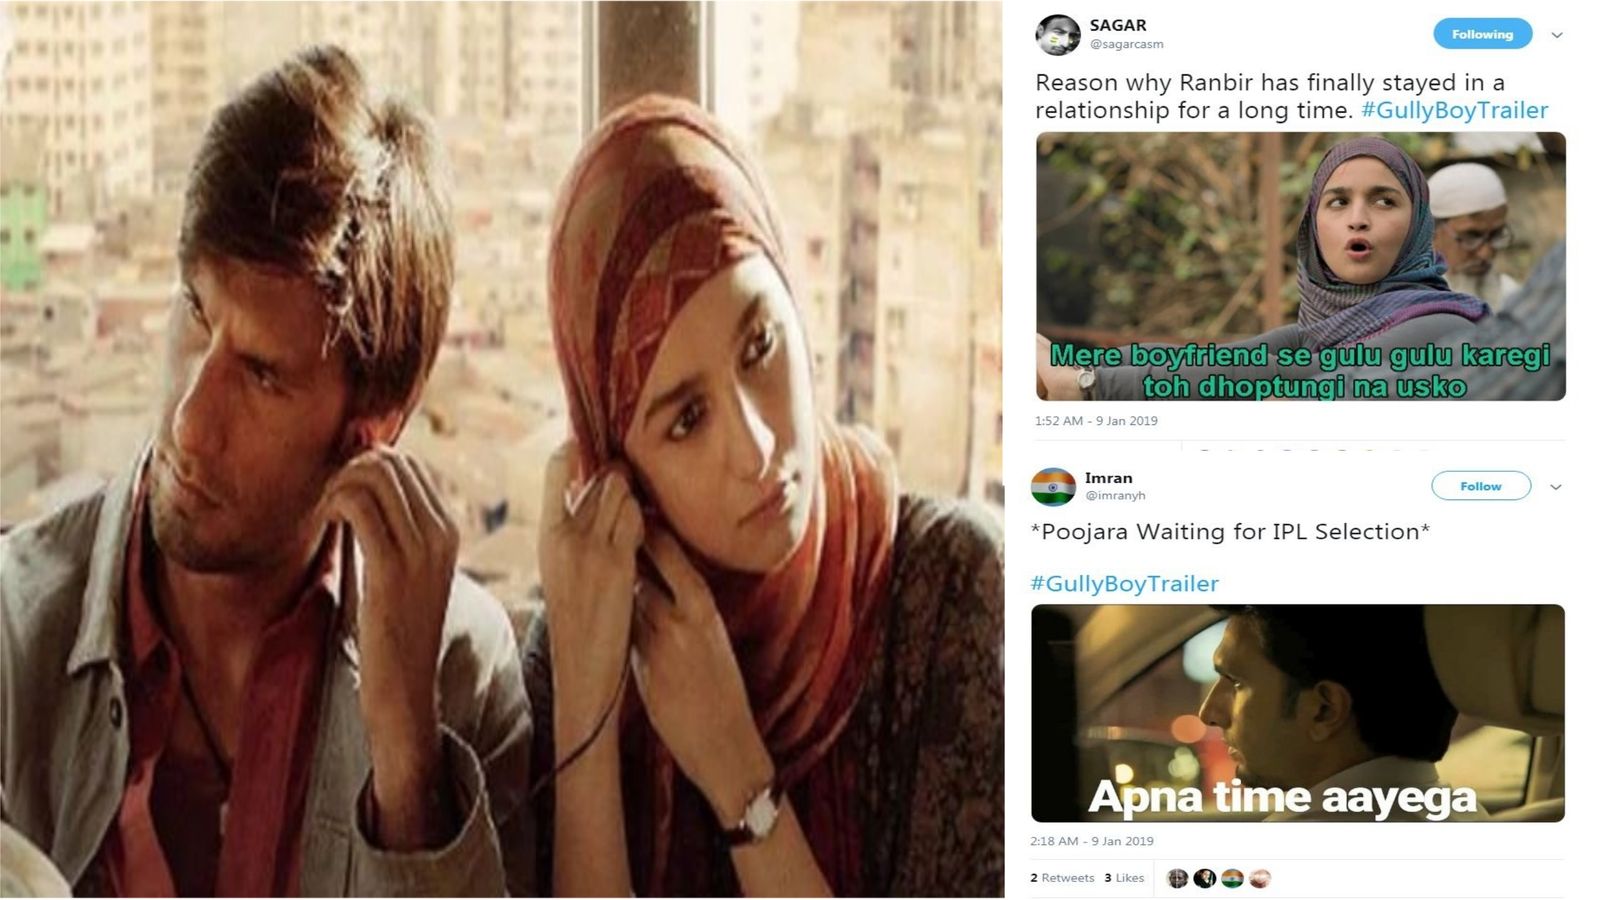 Gully Boy Trailer Is The Latest Fuel To Fire Up the Meme Fest On Twitter